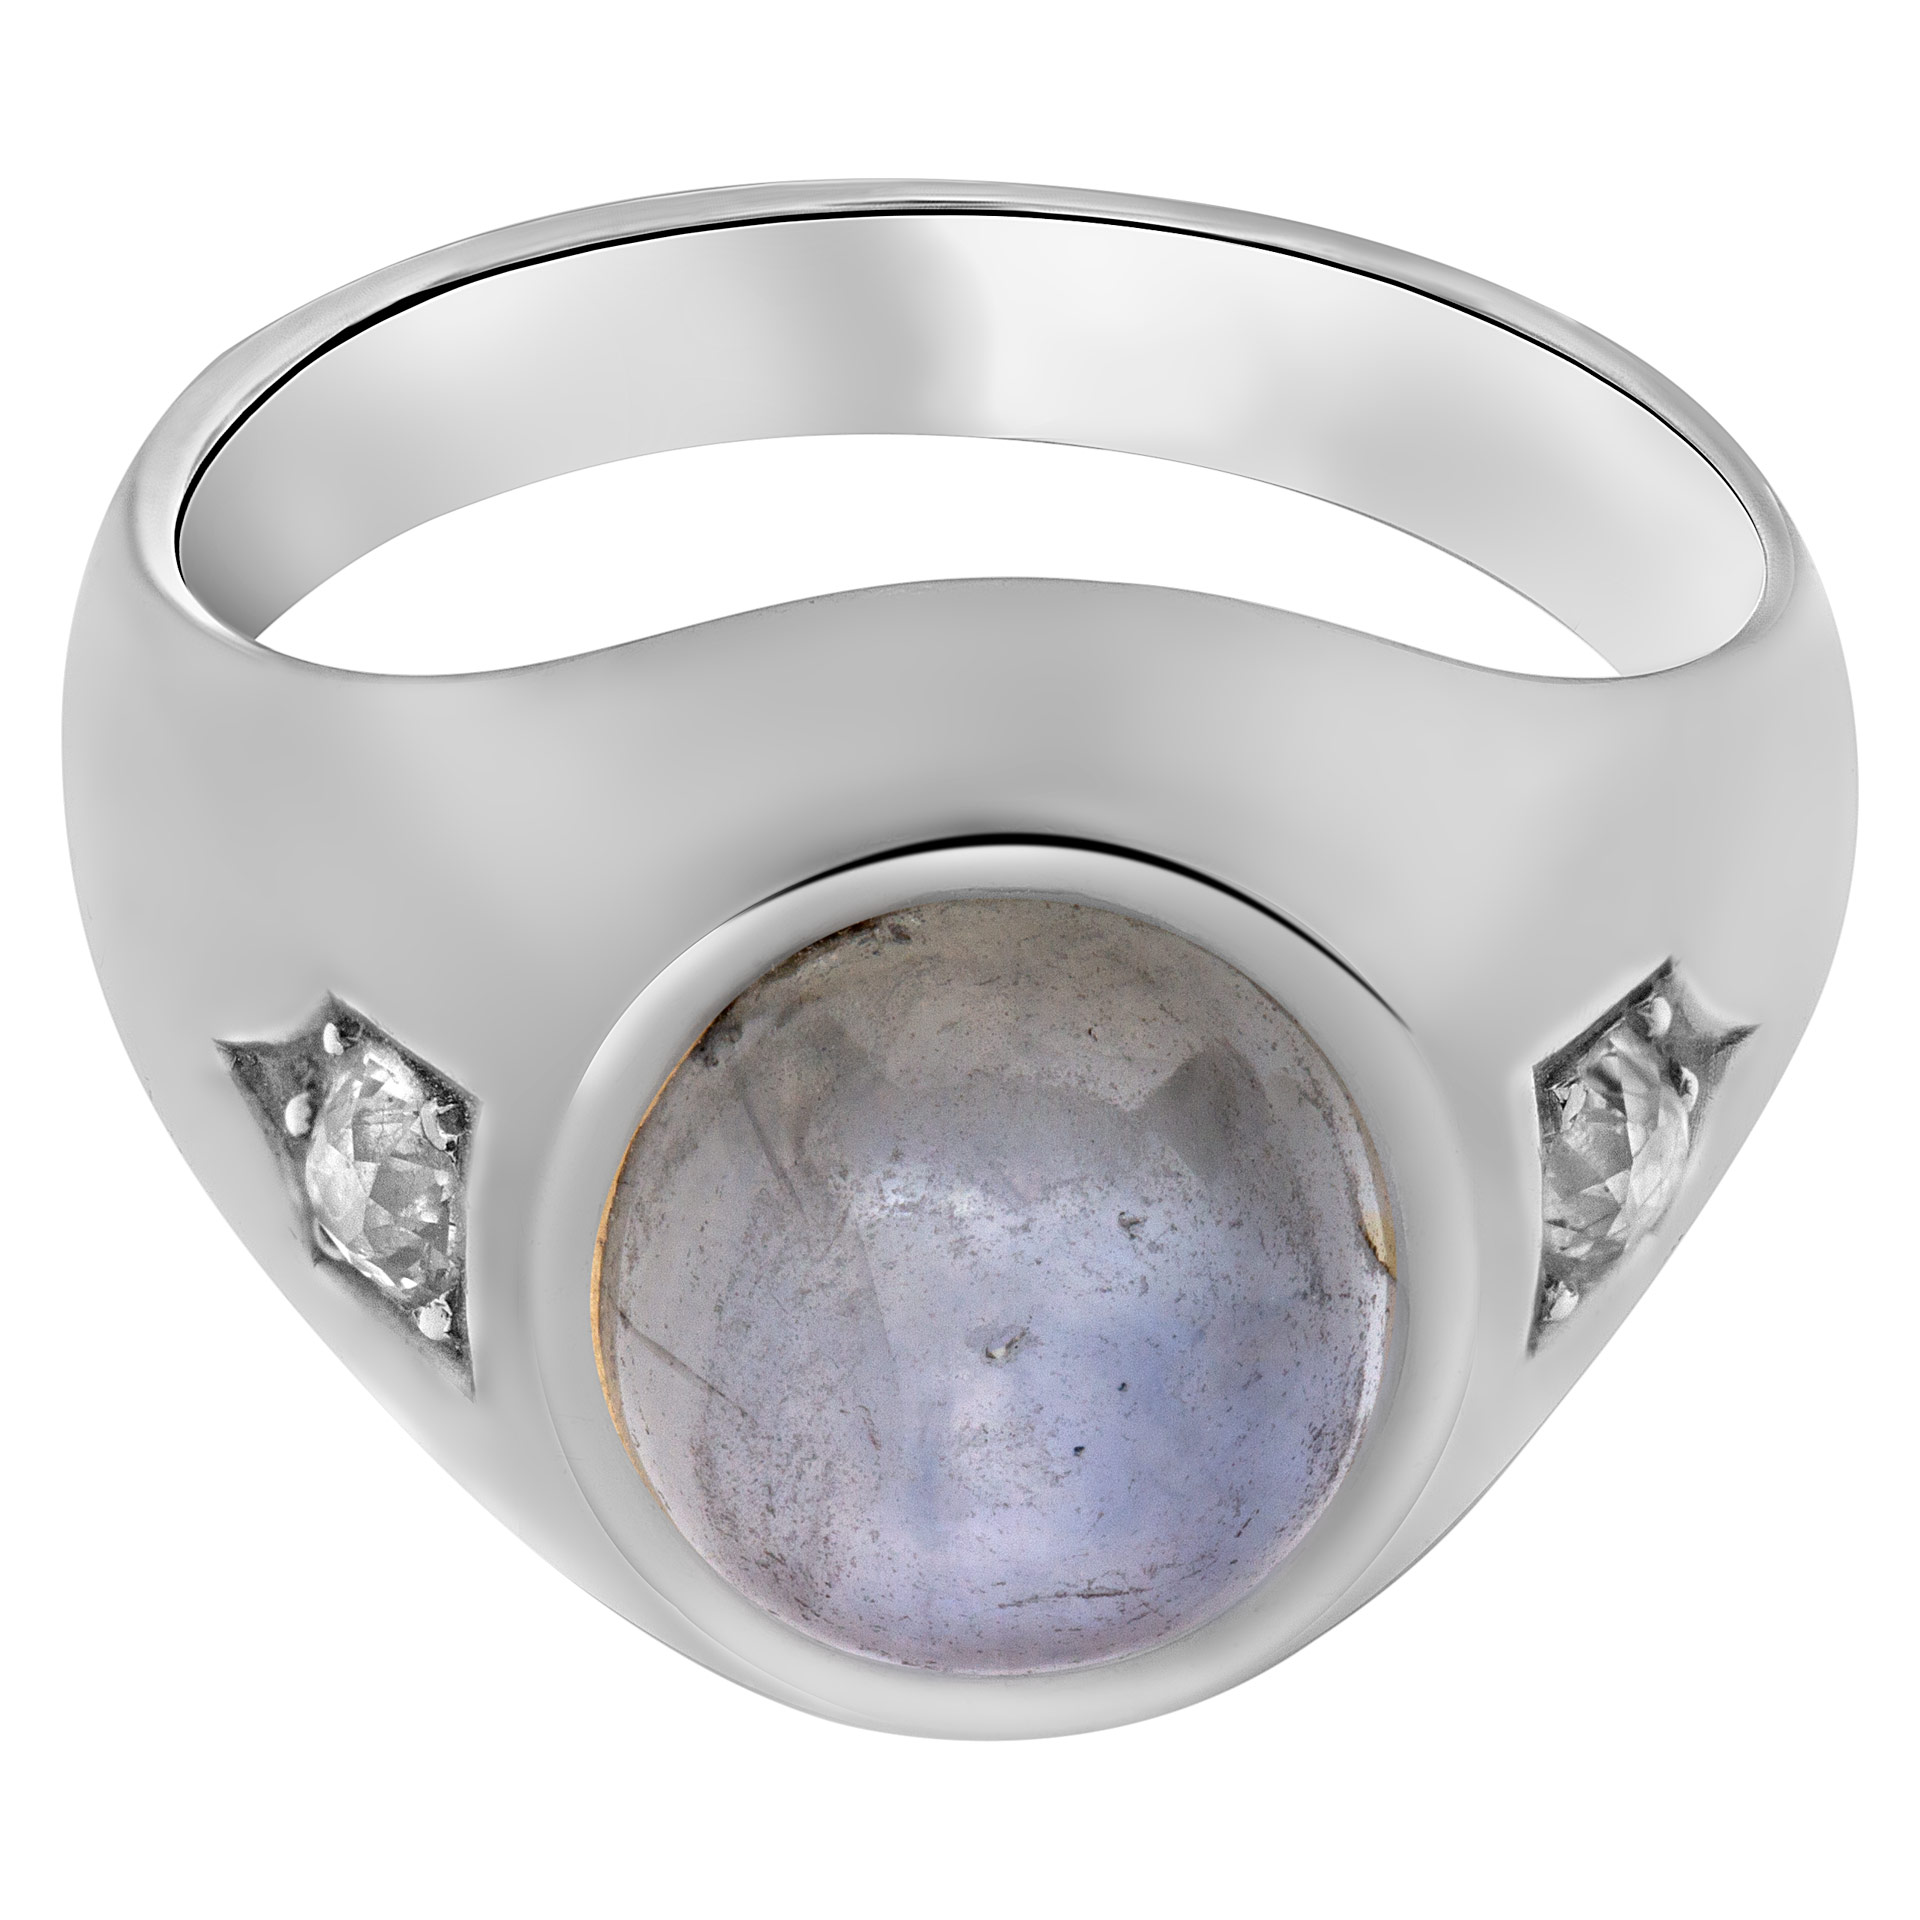 Cabachon star sapphire ring in 14k white gold image 1